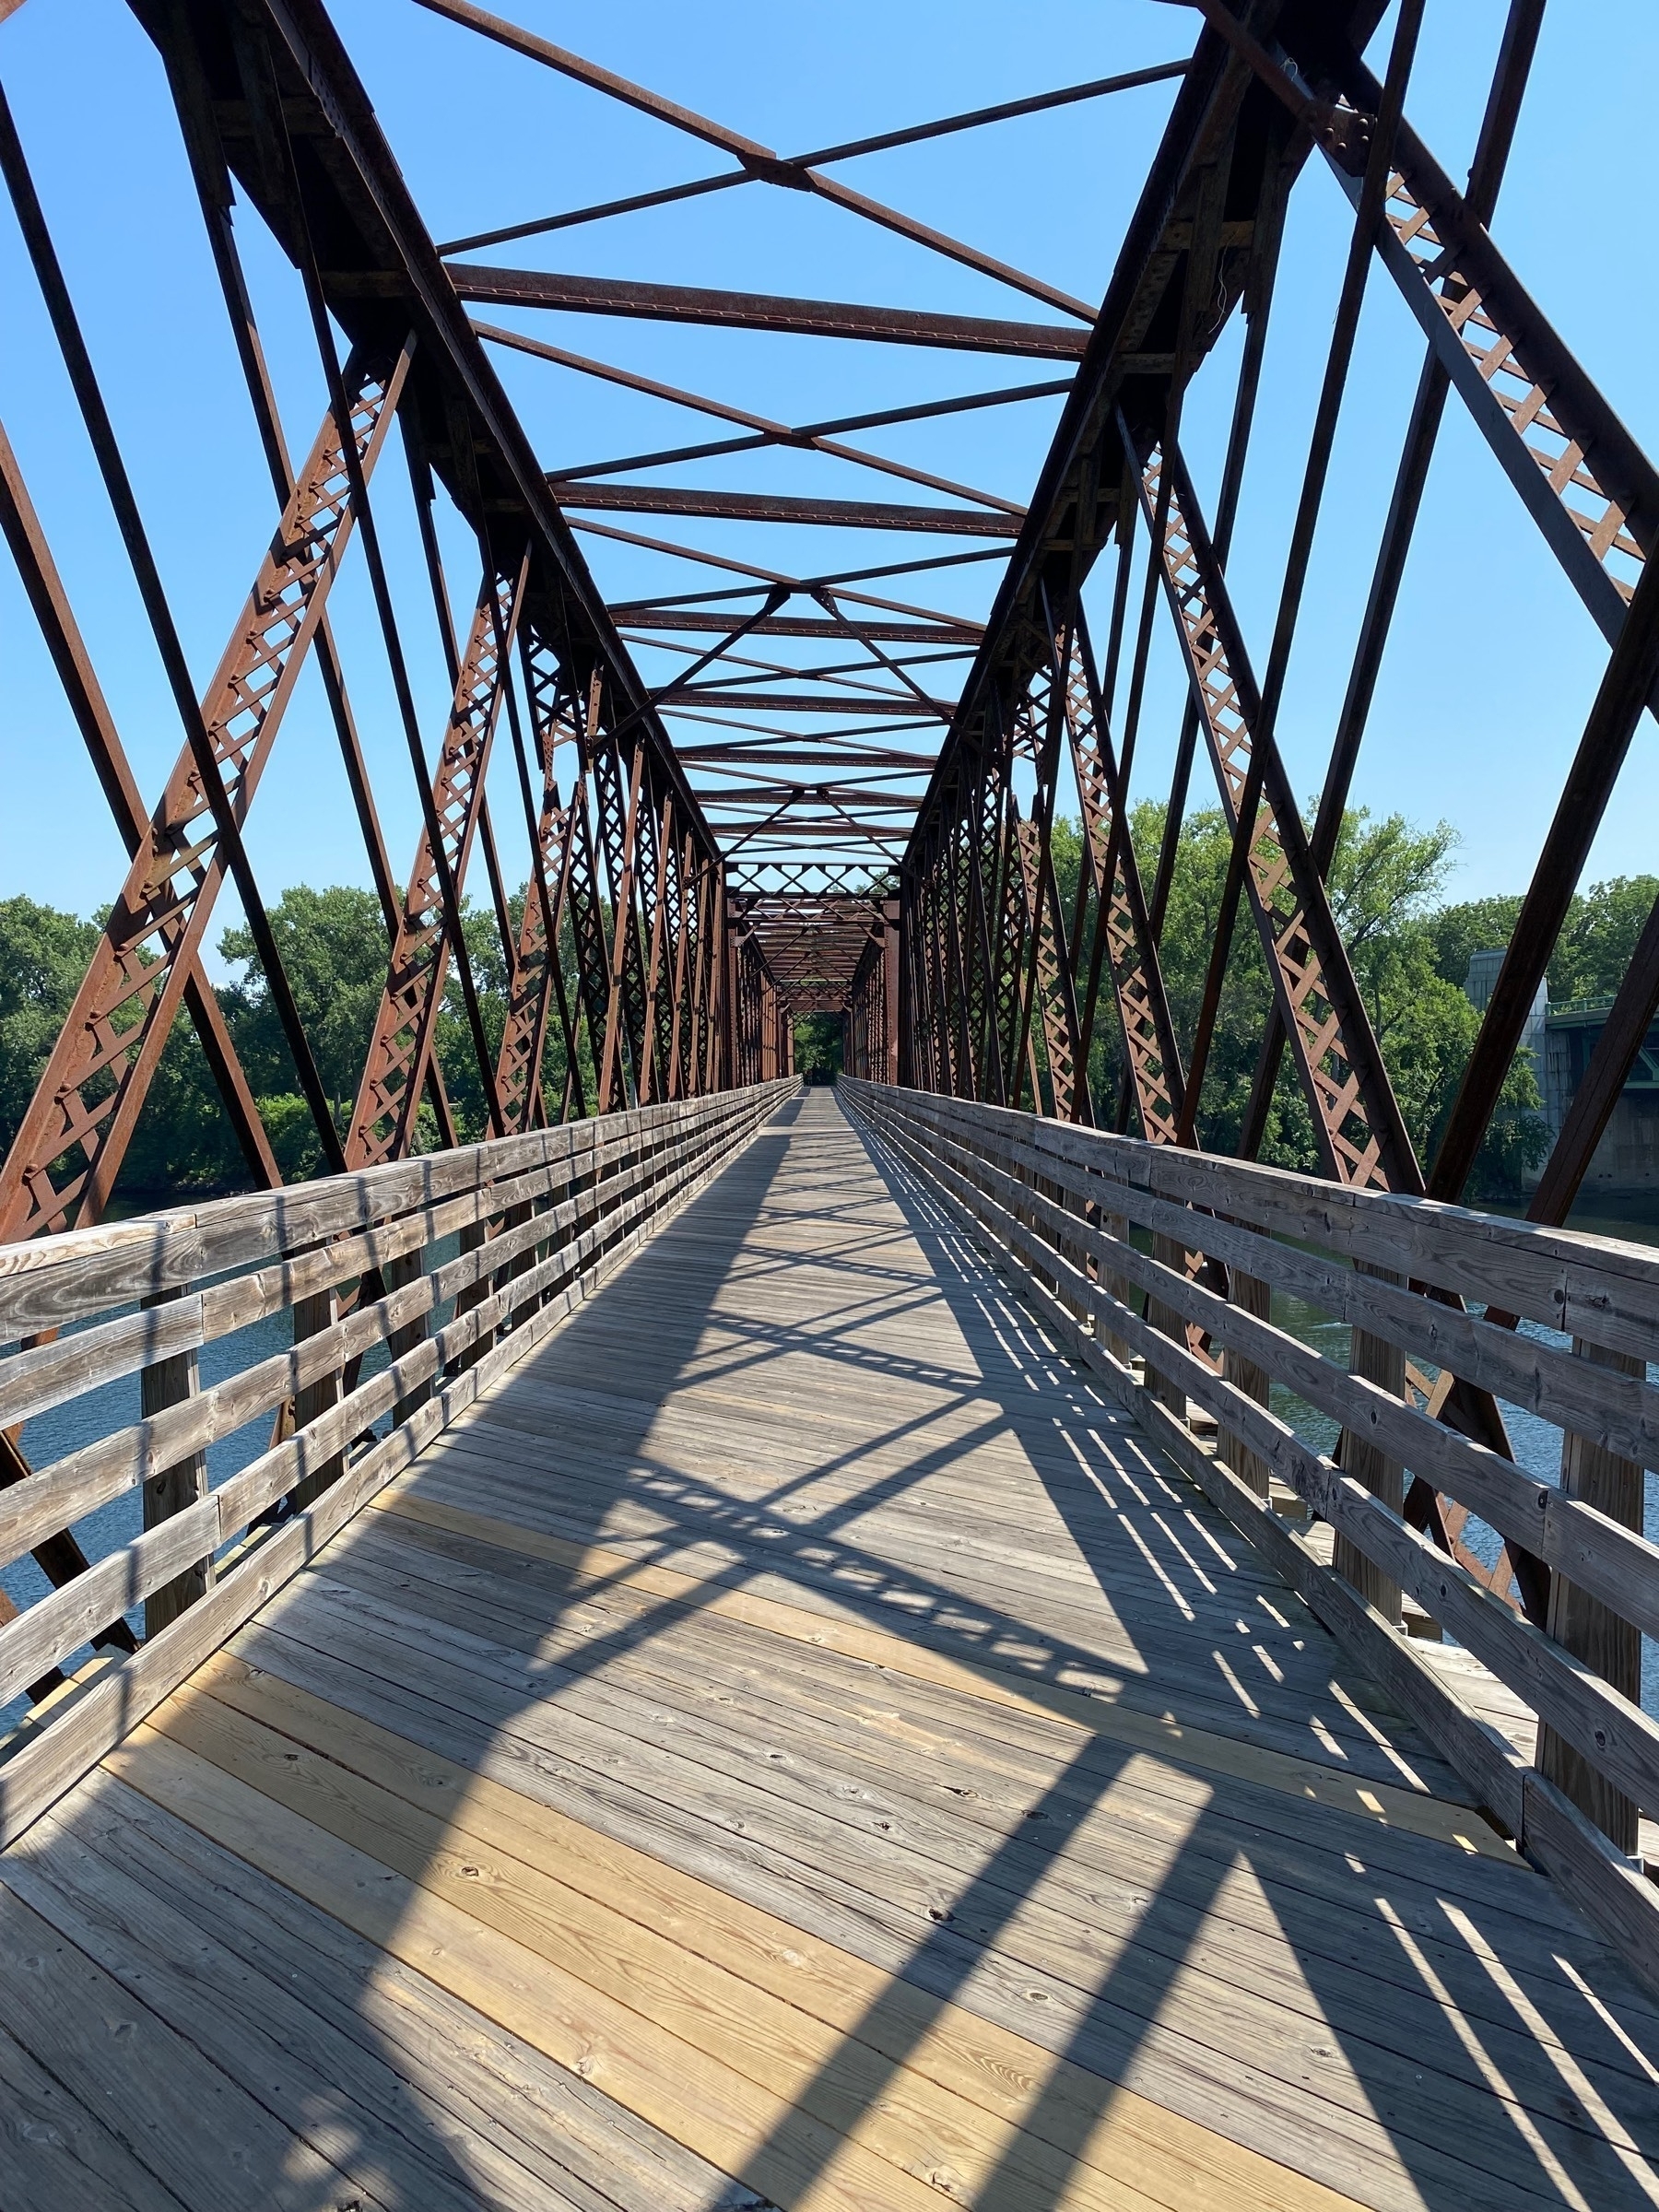 View of a bike path crossing the Connecticut River over an old railway bridge, the lattice of girders above casts shadows on the wooden boards below.